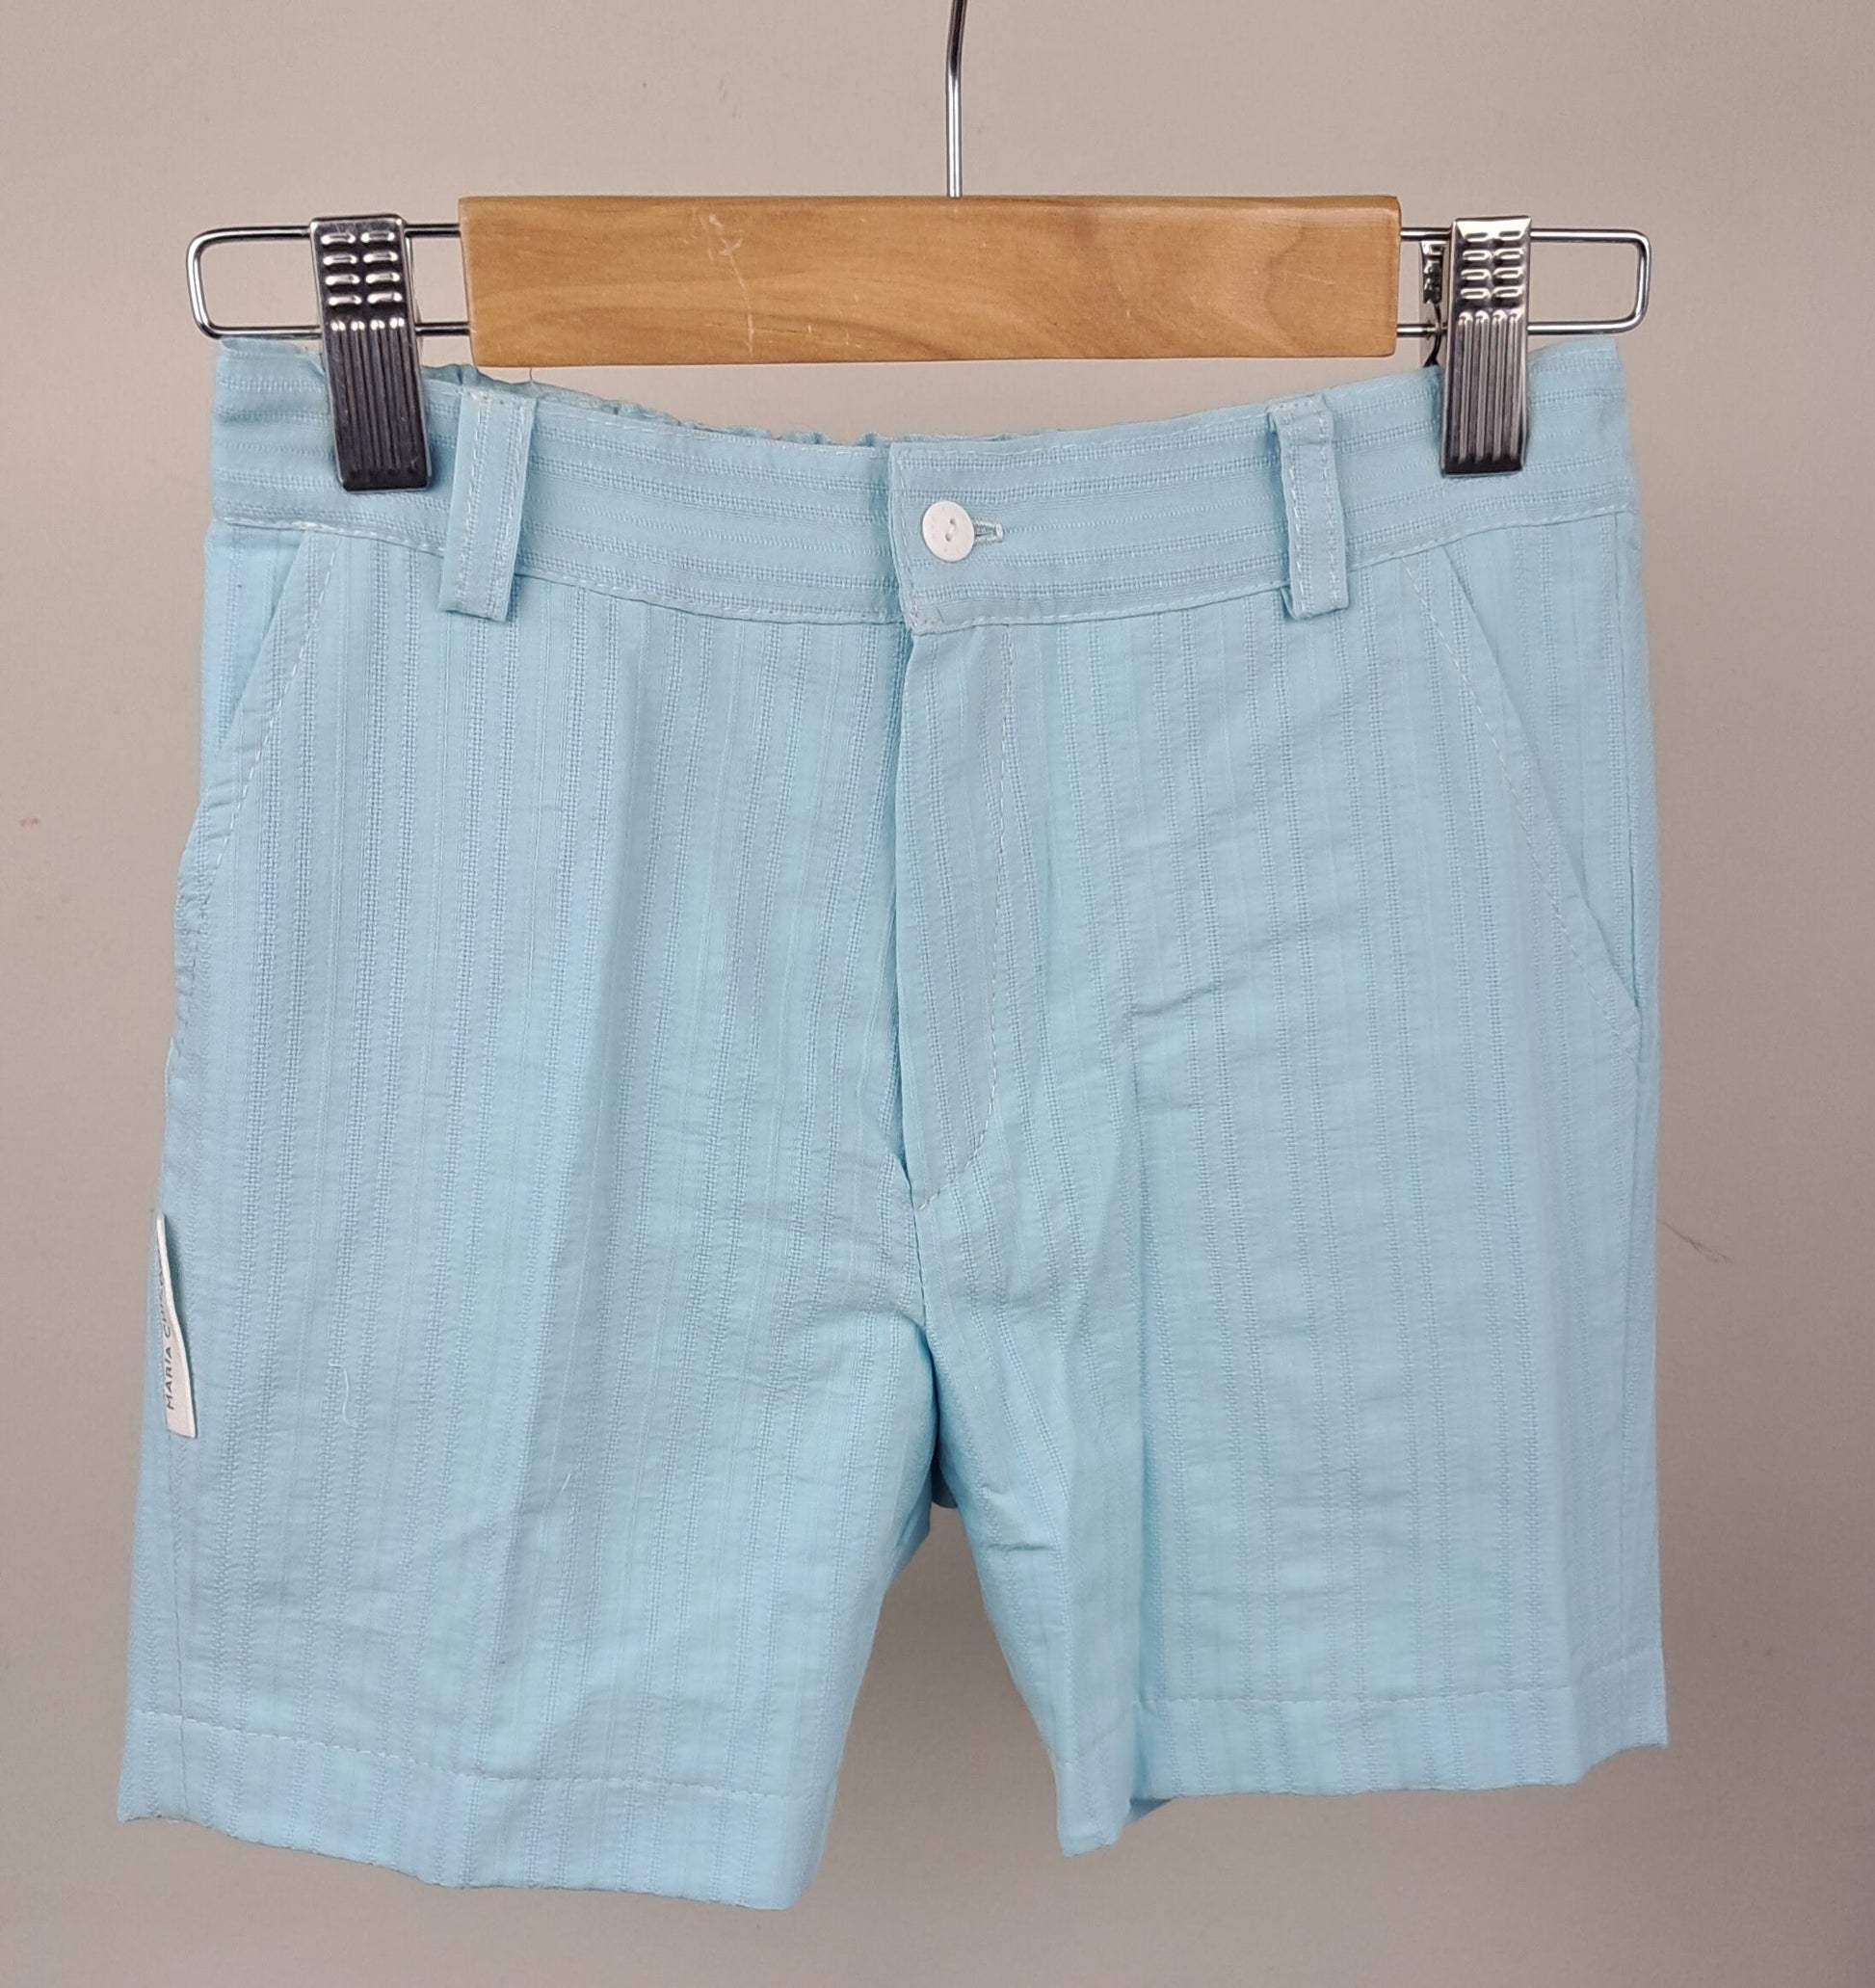 Mondego Shorts | Shorts | Iberica - Pretty things from Portugal